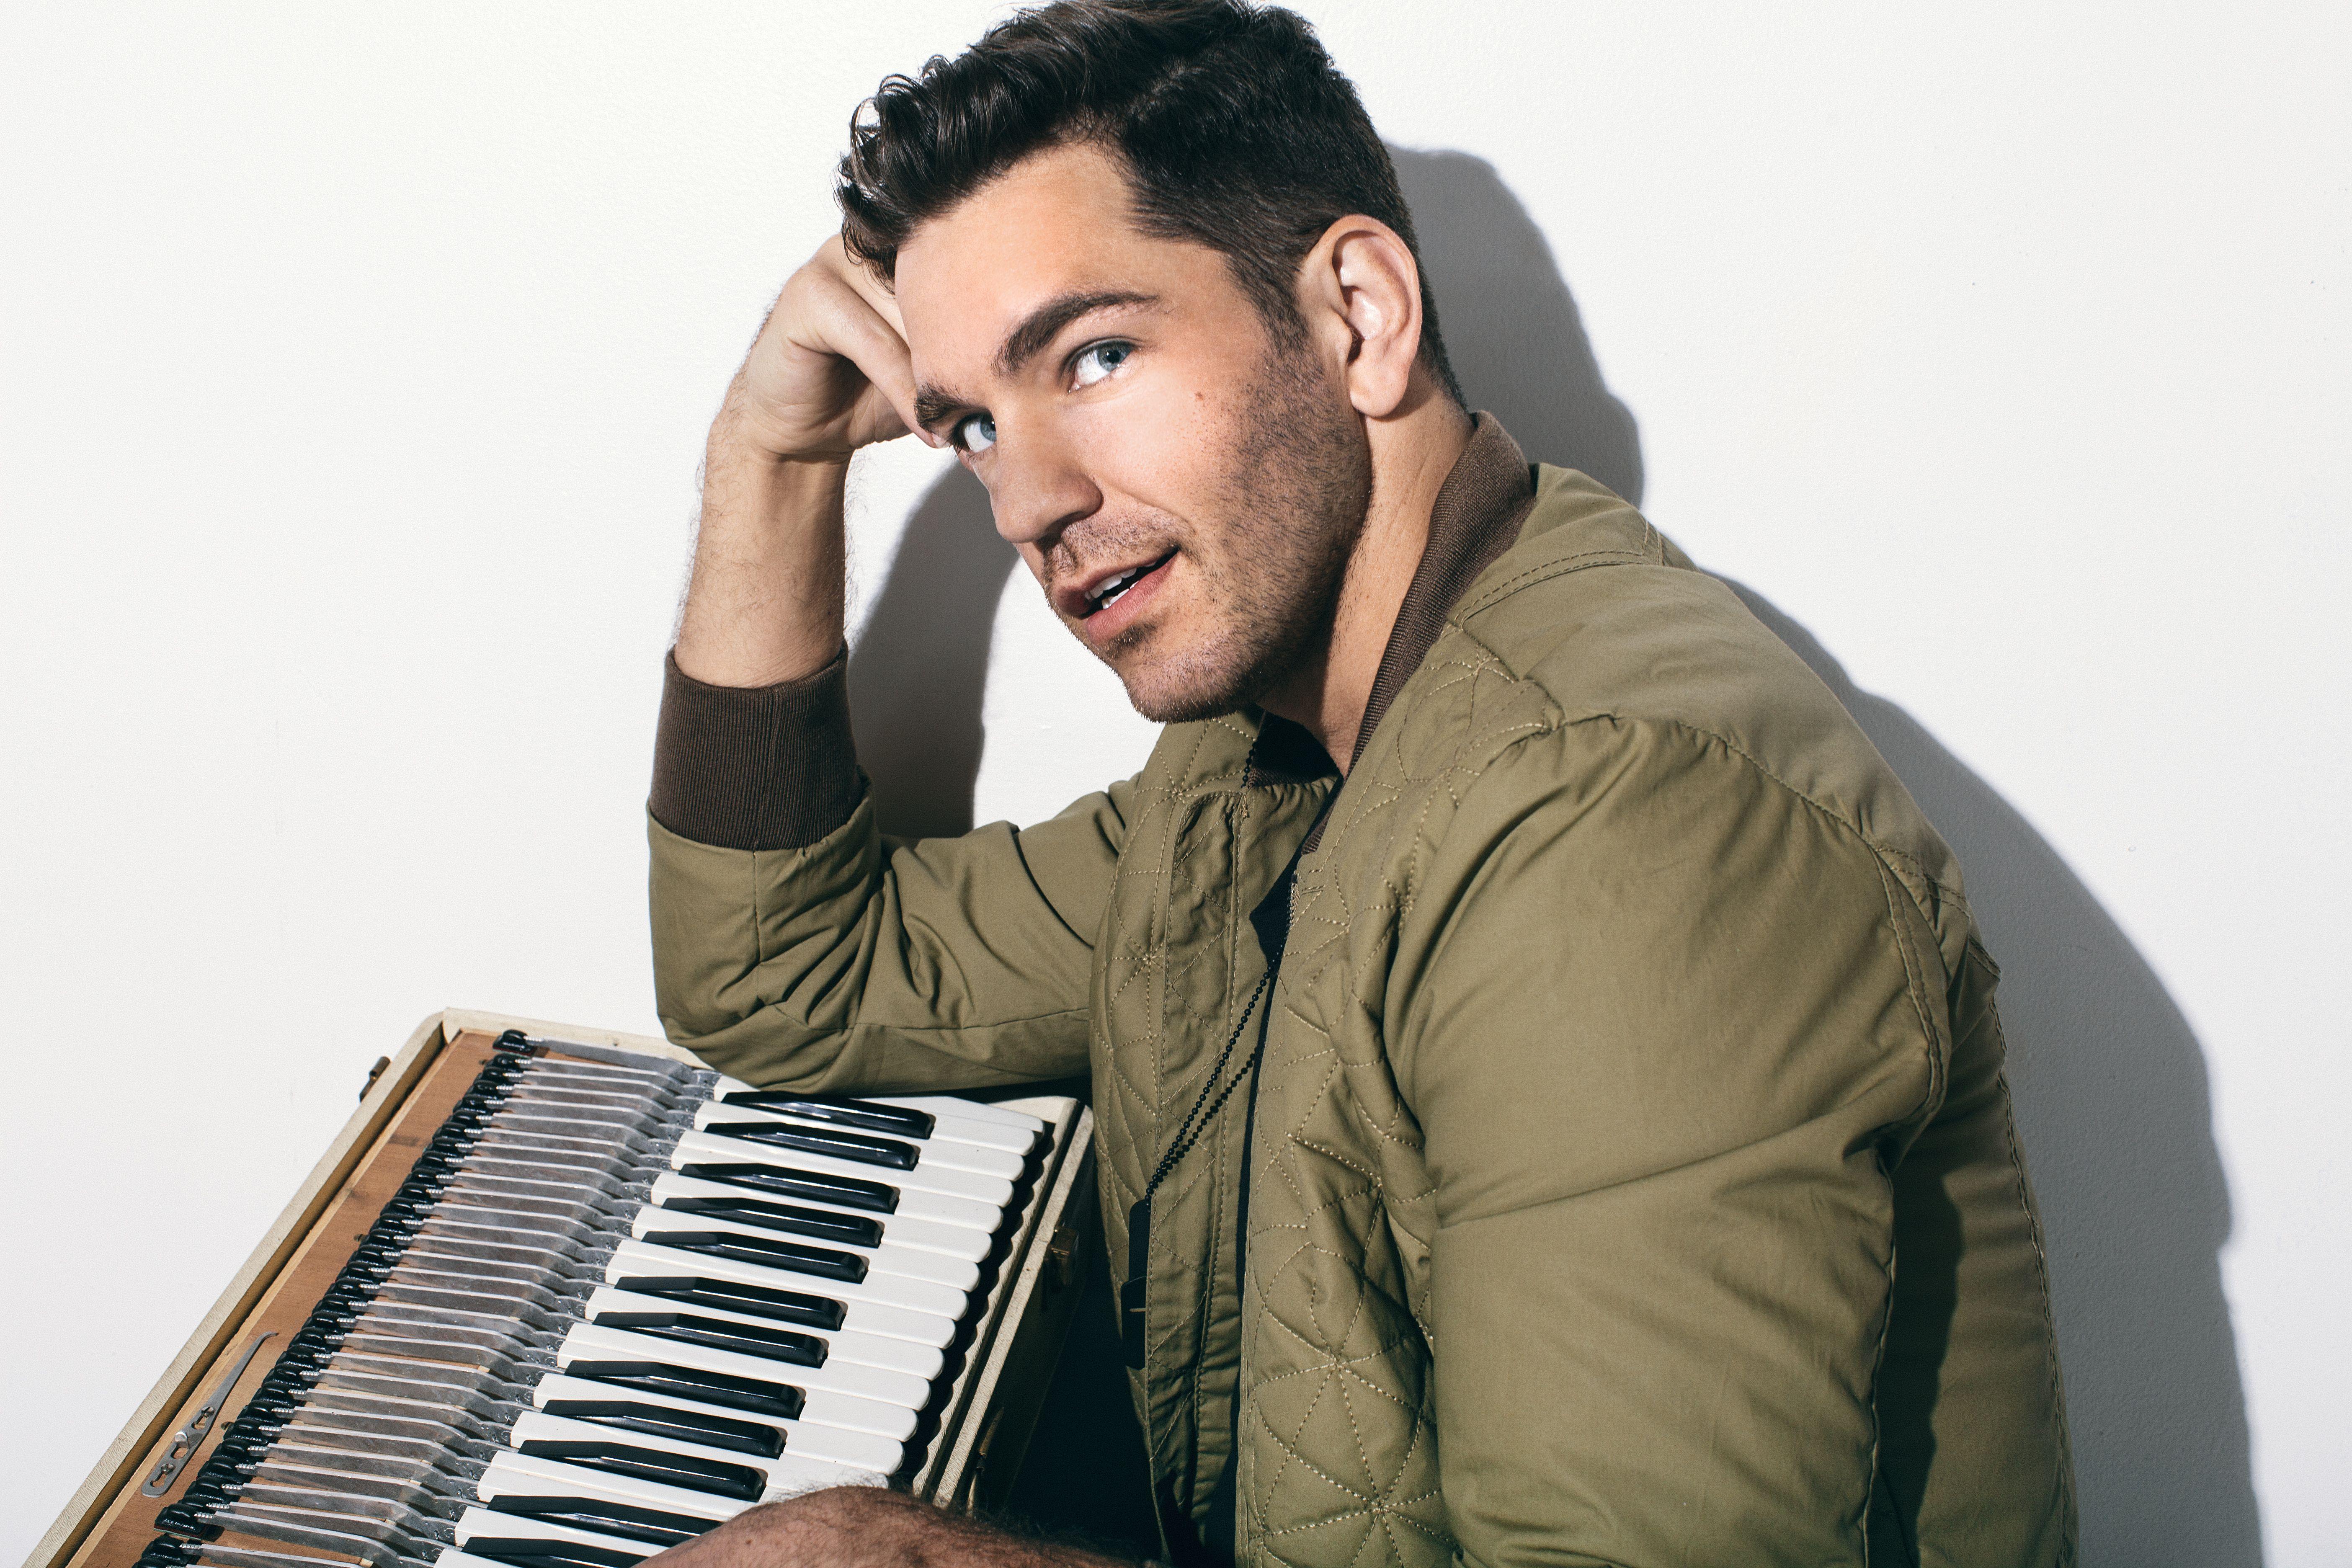 Andy Grammer Say's He's 'Good' with Not Being Labeled This or That